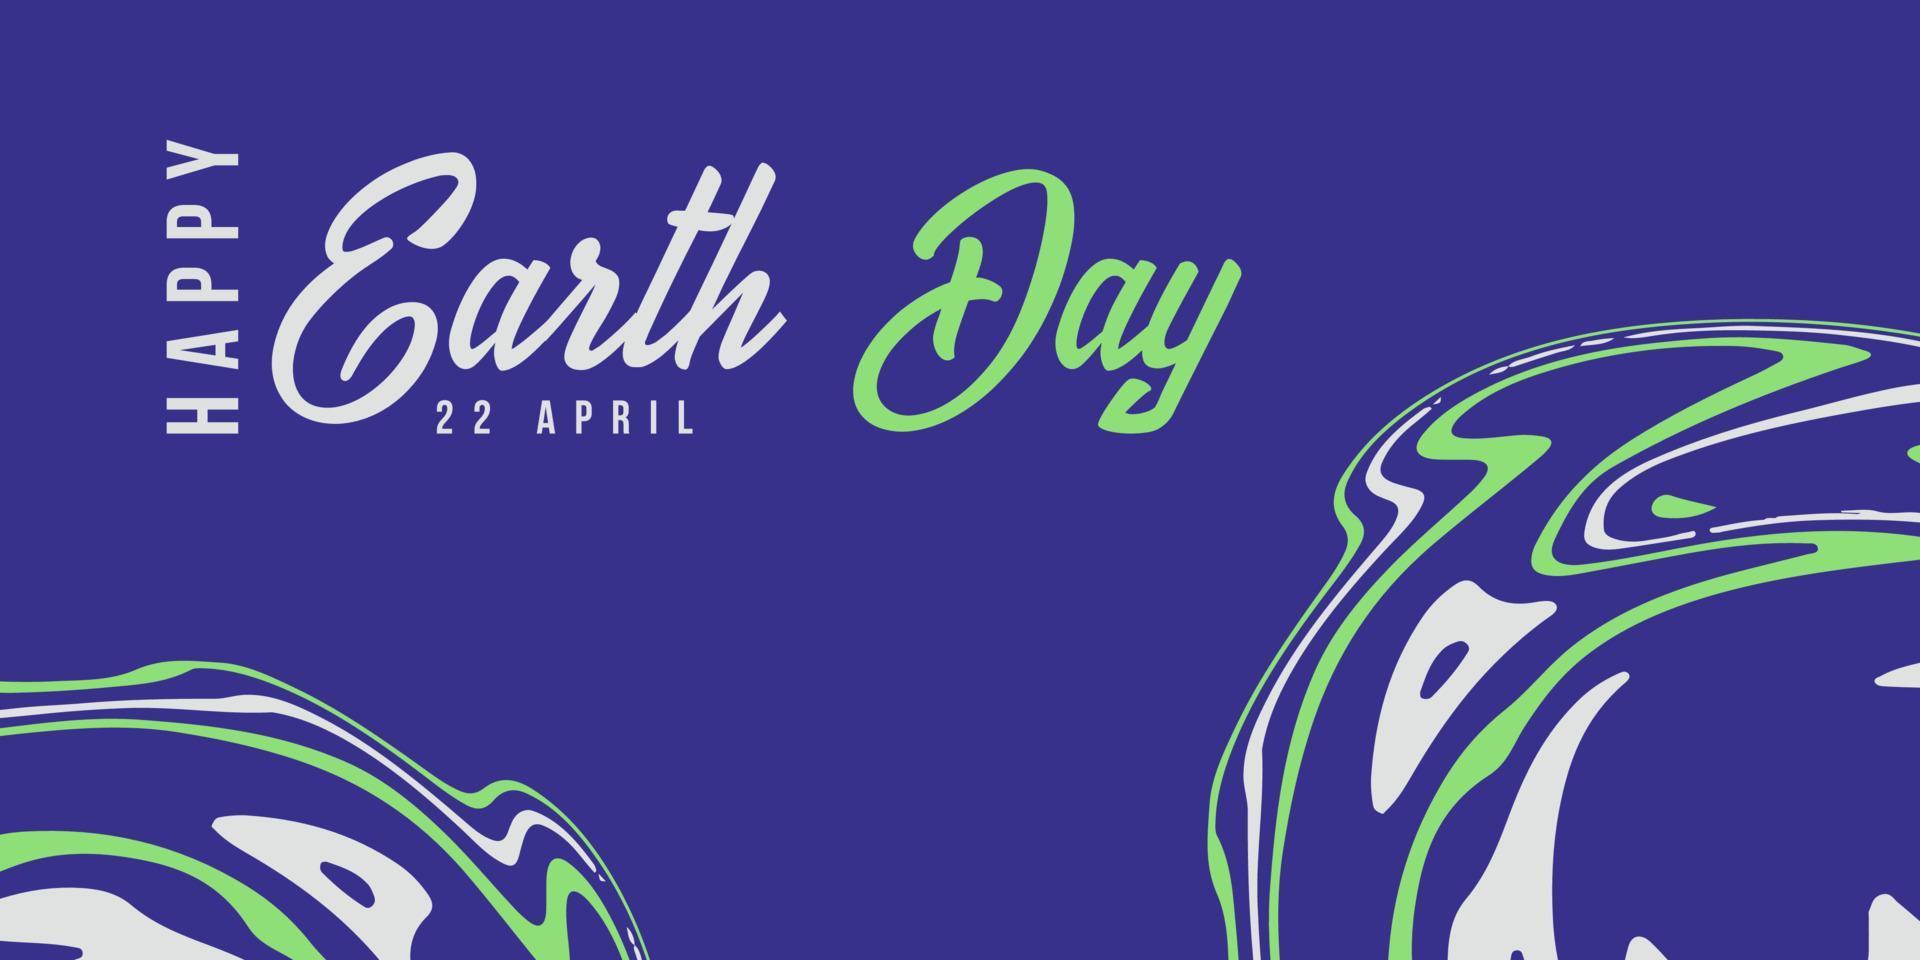 creative happy earth day poster concept design illustration. simple world day banner design concept for advertising, celebration and media social post. vector